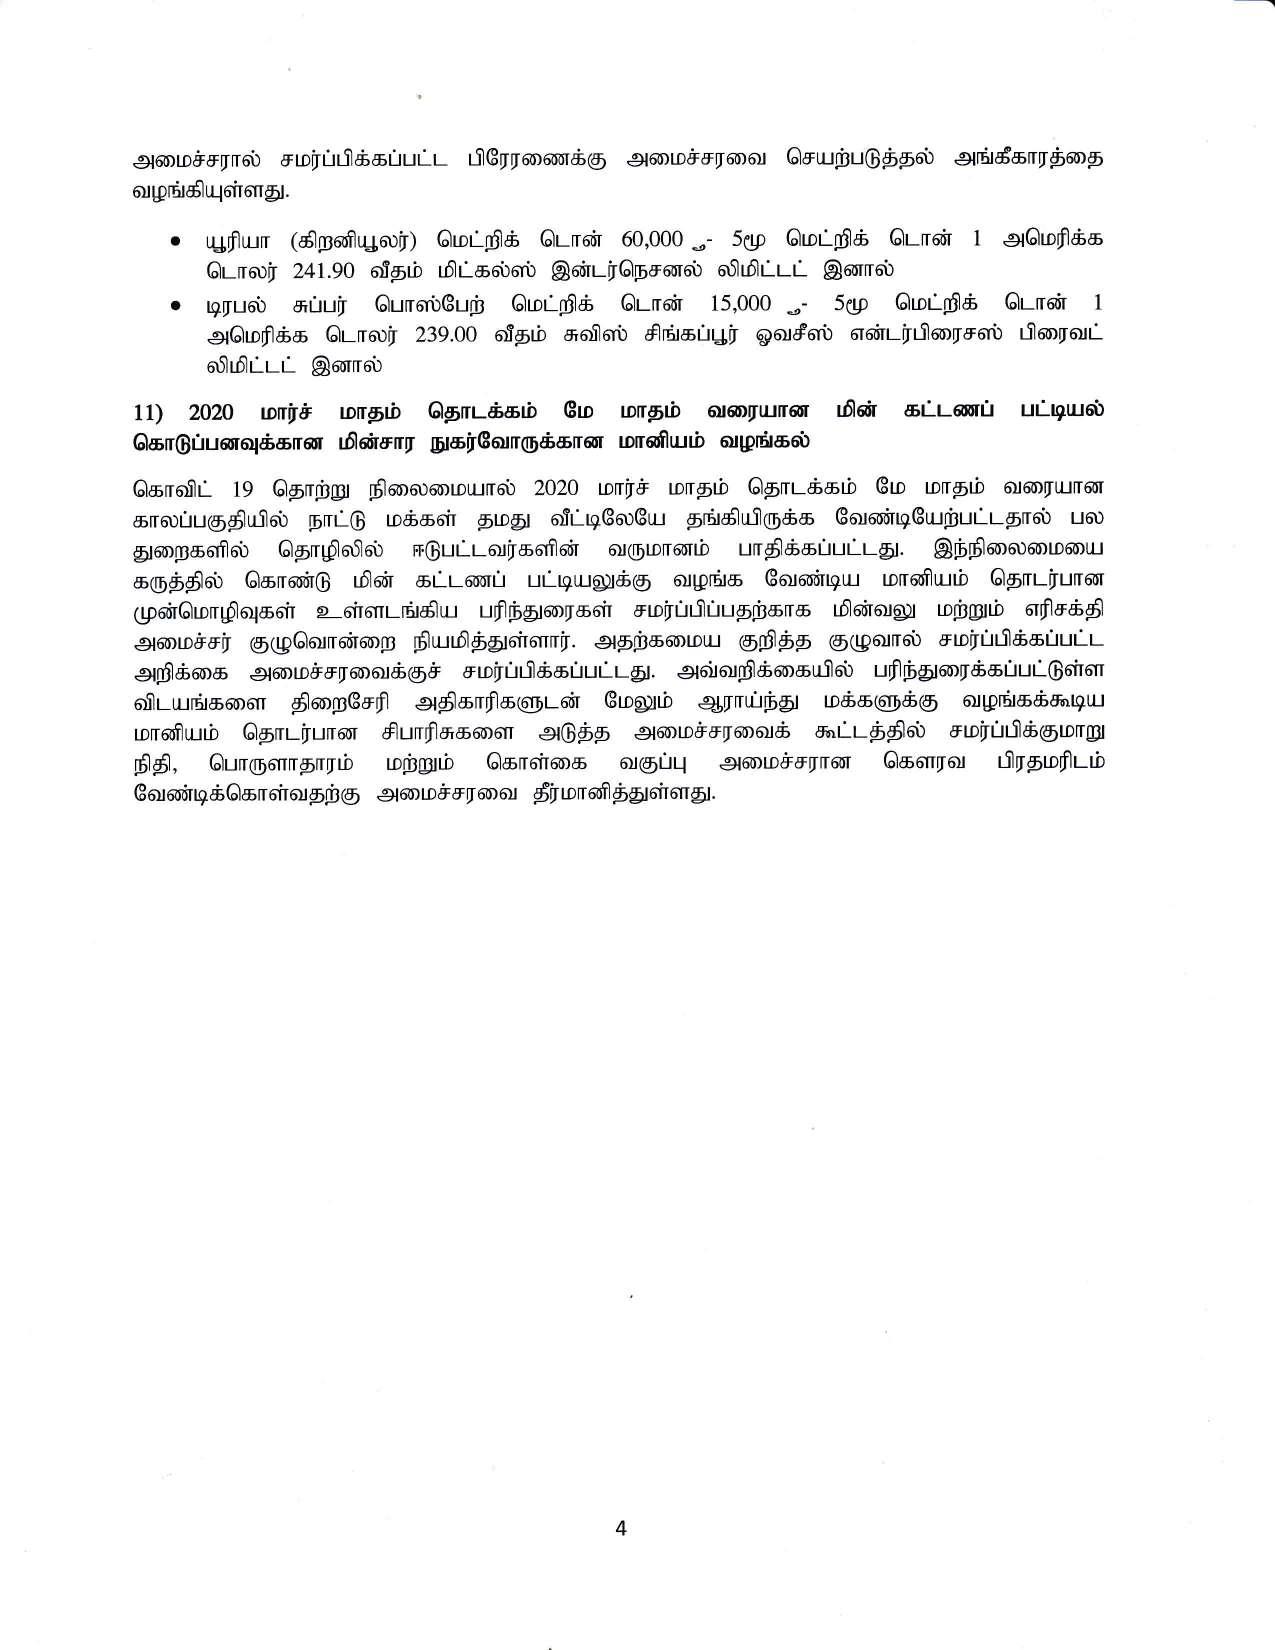 Cabinet Decision on 08.07.2020 TAMIL page 004